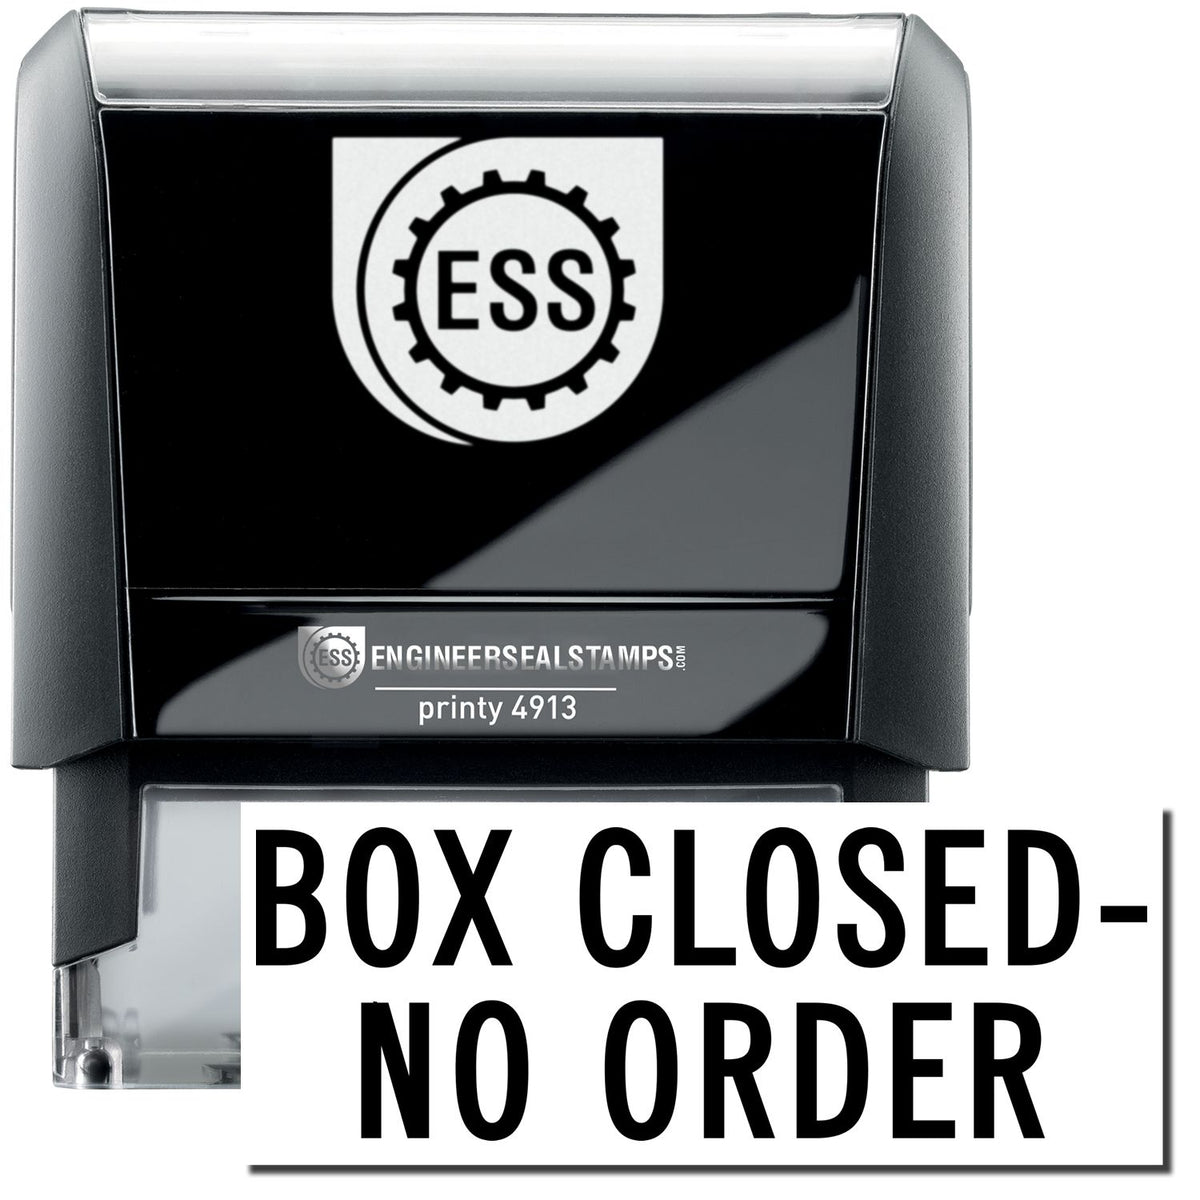 A self-inking stamp with a stamped image showing how the text &quot;BOX CLOSED - NO ORDER&quot; in a large font is displayed by it after stamping.